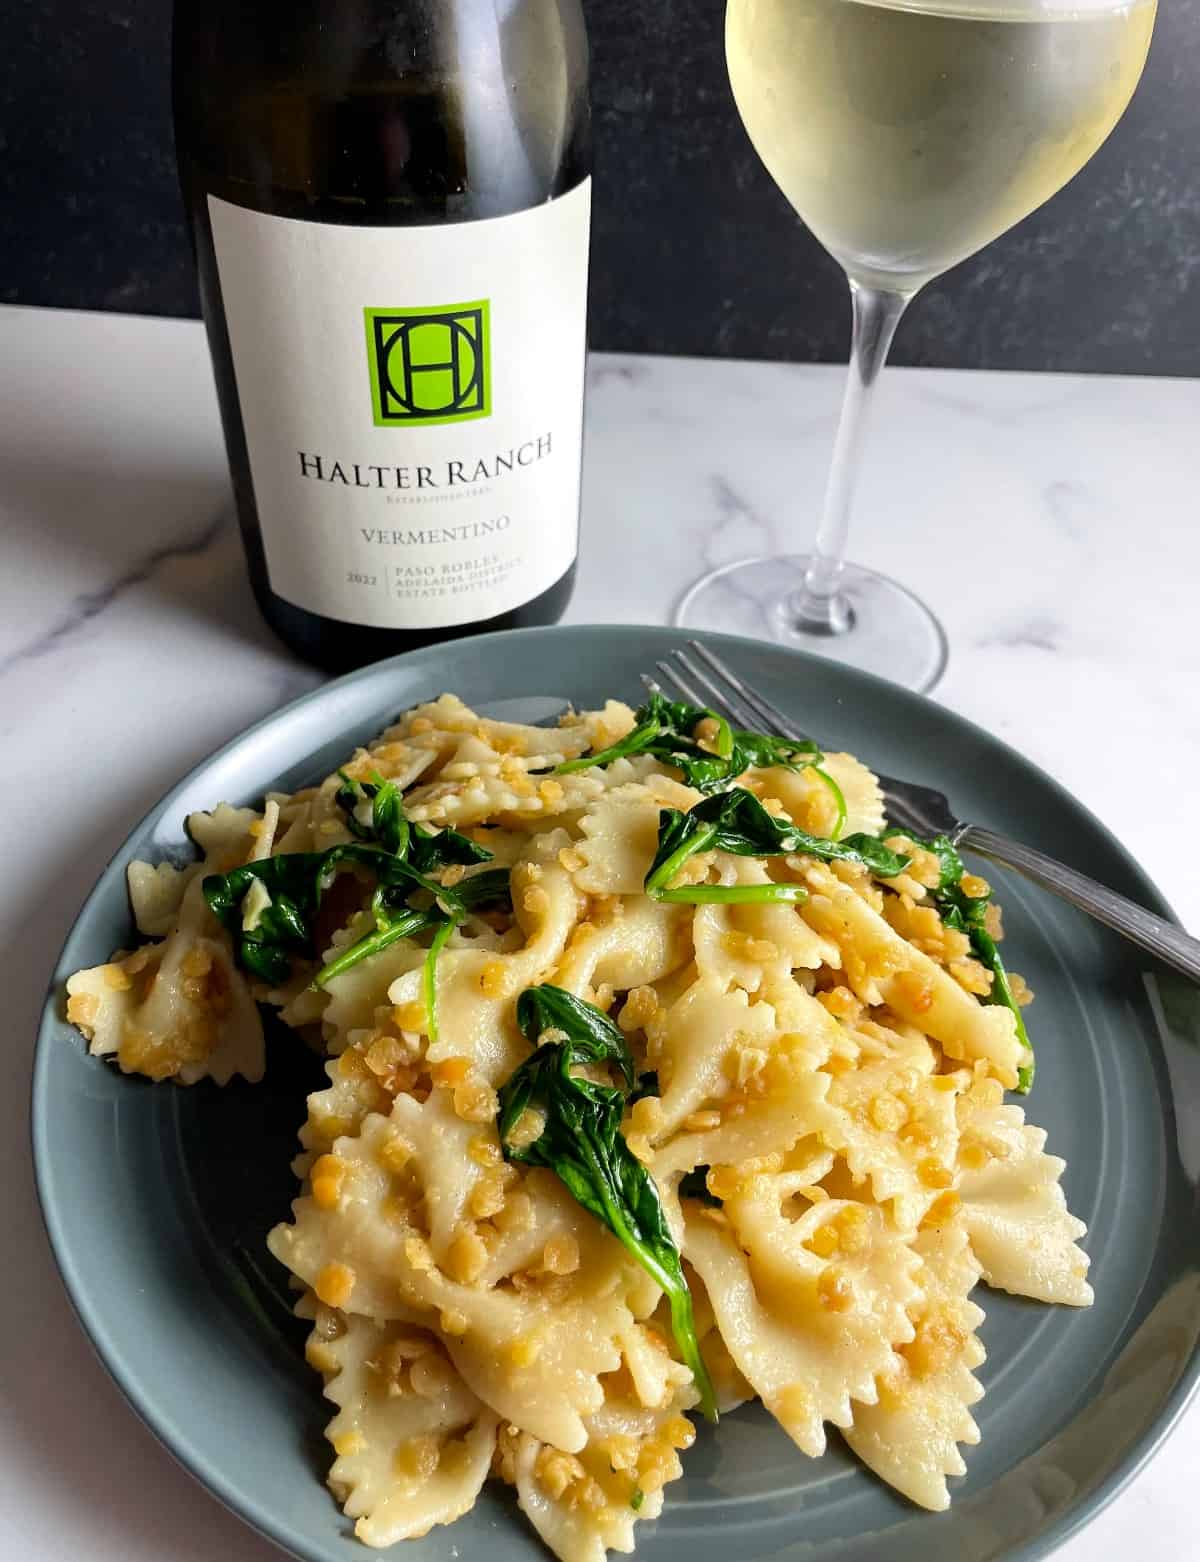 Bottle and glass of Halter Ranch Vermentino, served with a plate with bowtie pasta with red lentils and spinach.